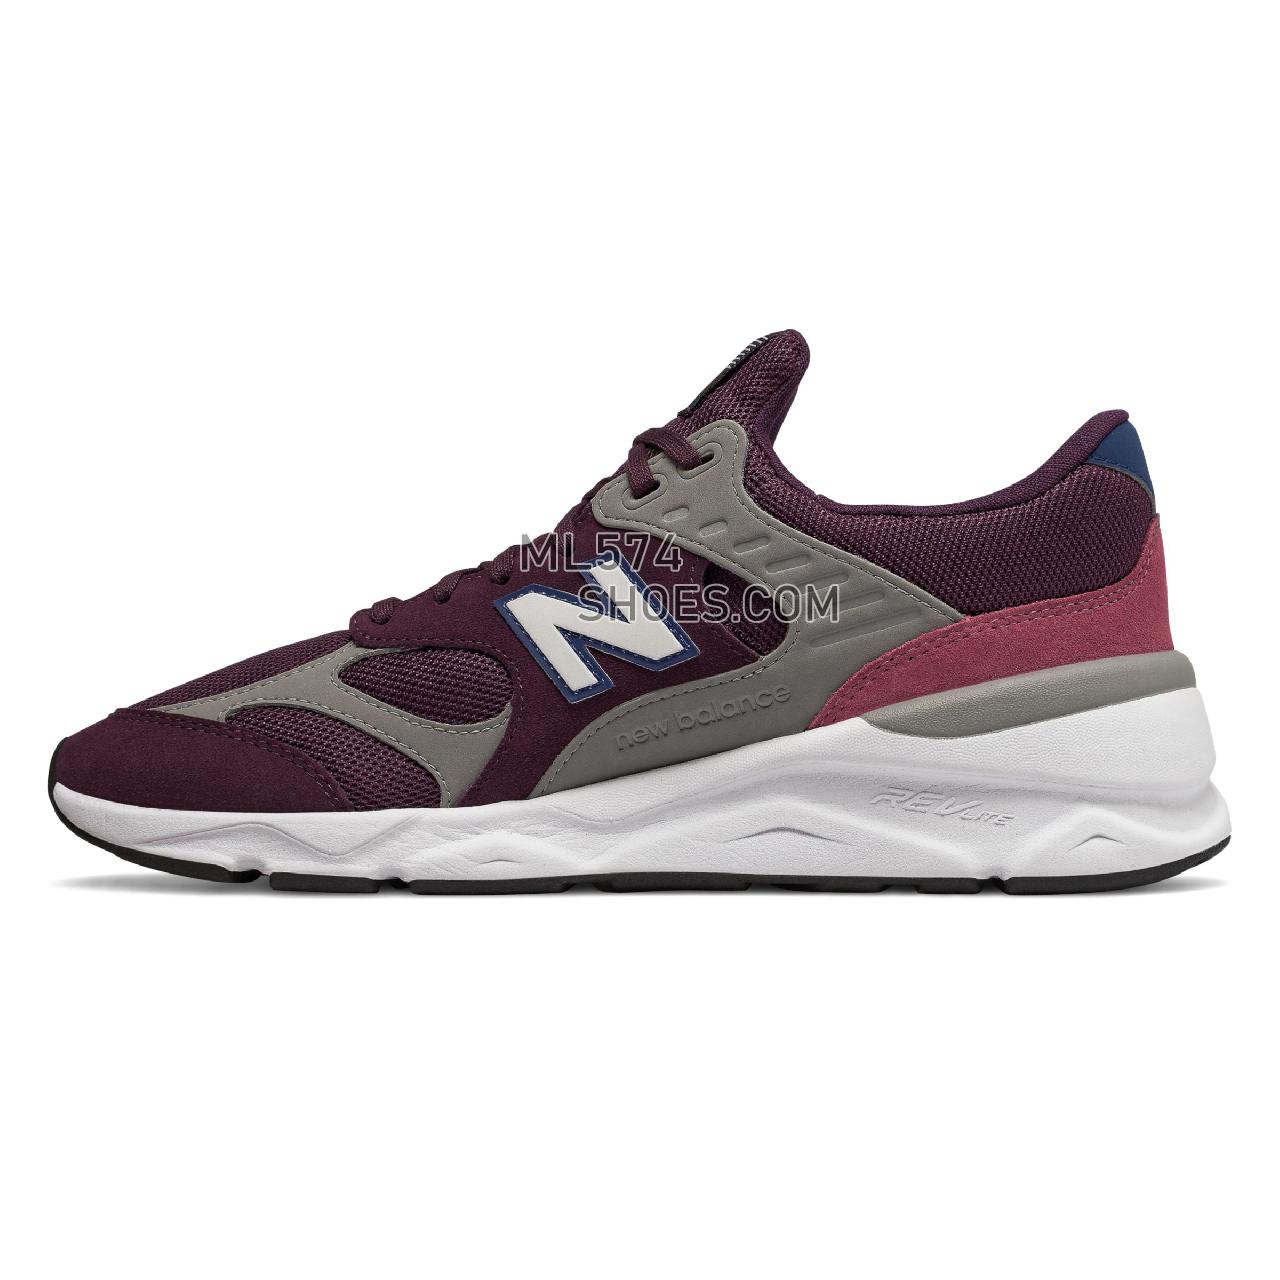 New Balance X-90 - Men's Sport Style Sneakers - Dark Currant with Team Away Grey - MSX90RCF